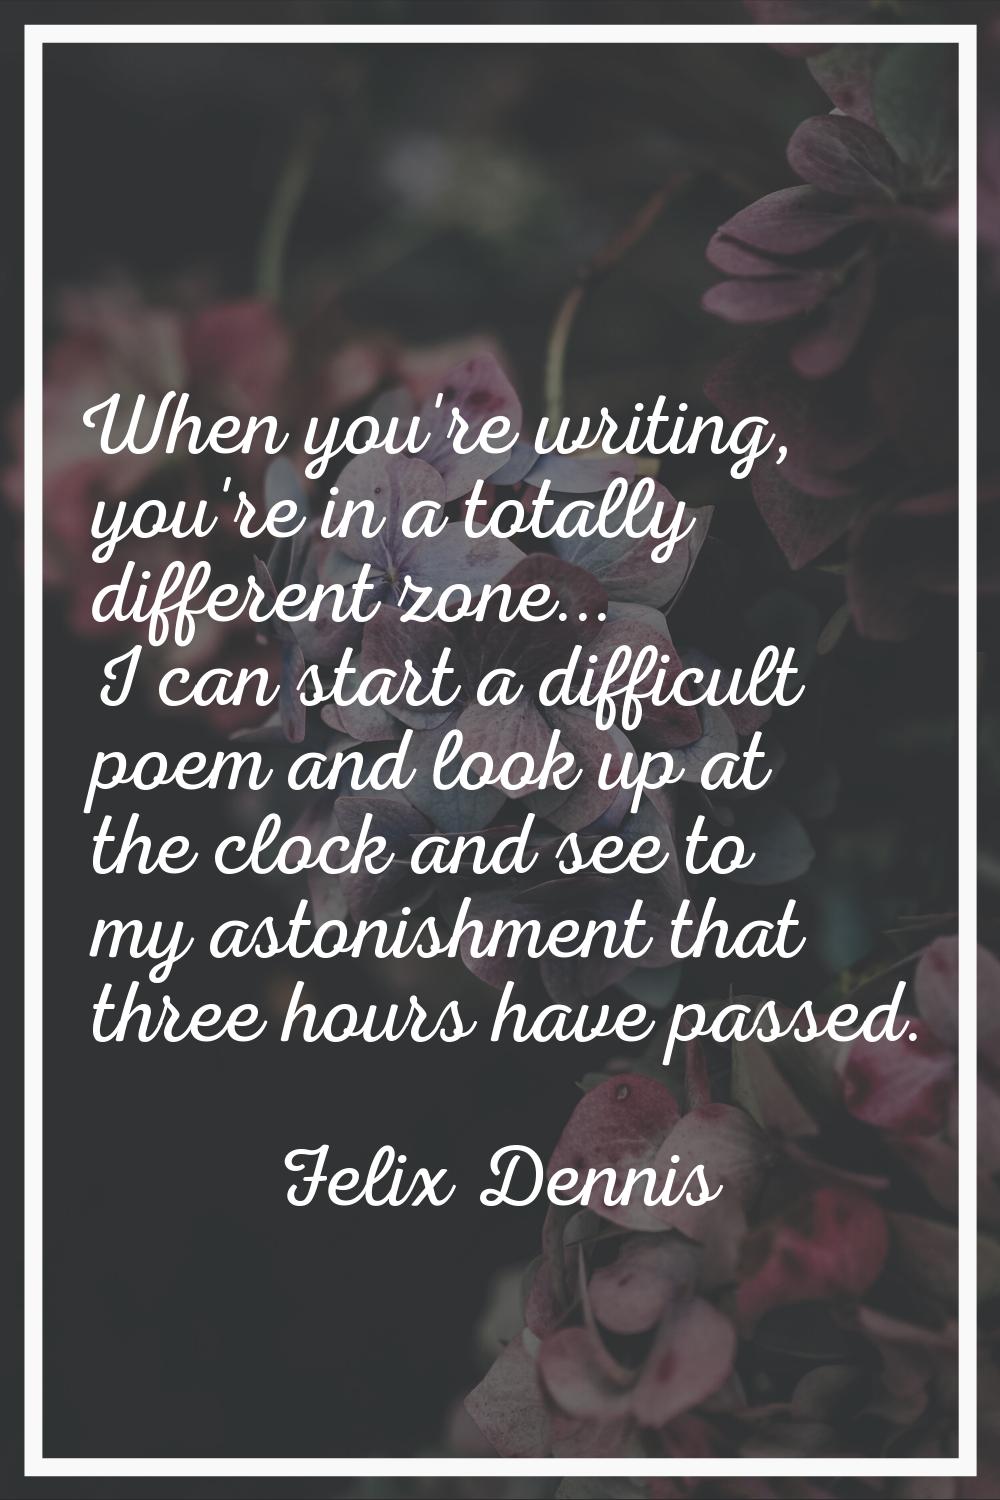 When you're writing, you're in a totally different zone... I can start a difficult poem and look up